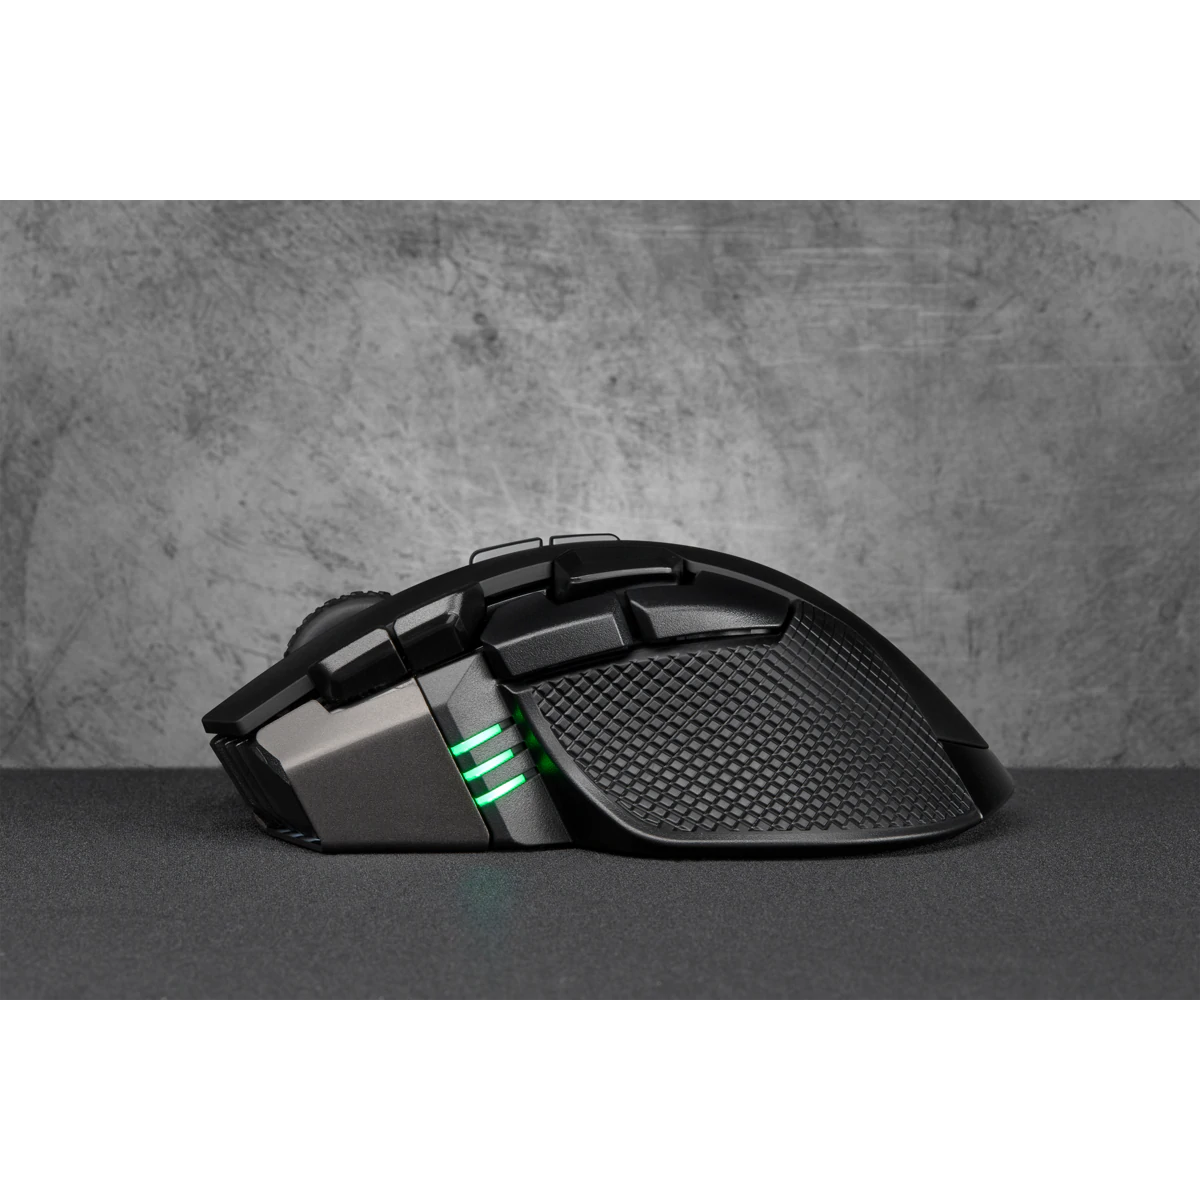 Mouse Gamer Corsair Ironclaw RGB Wireless Slipstream, (Bluetooth + USB receptor + Cable USB)